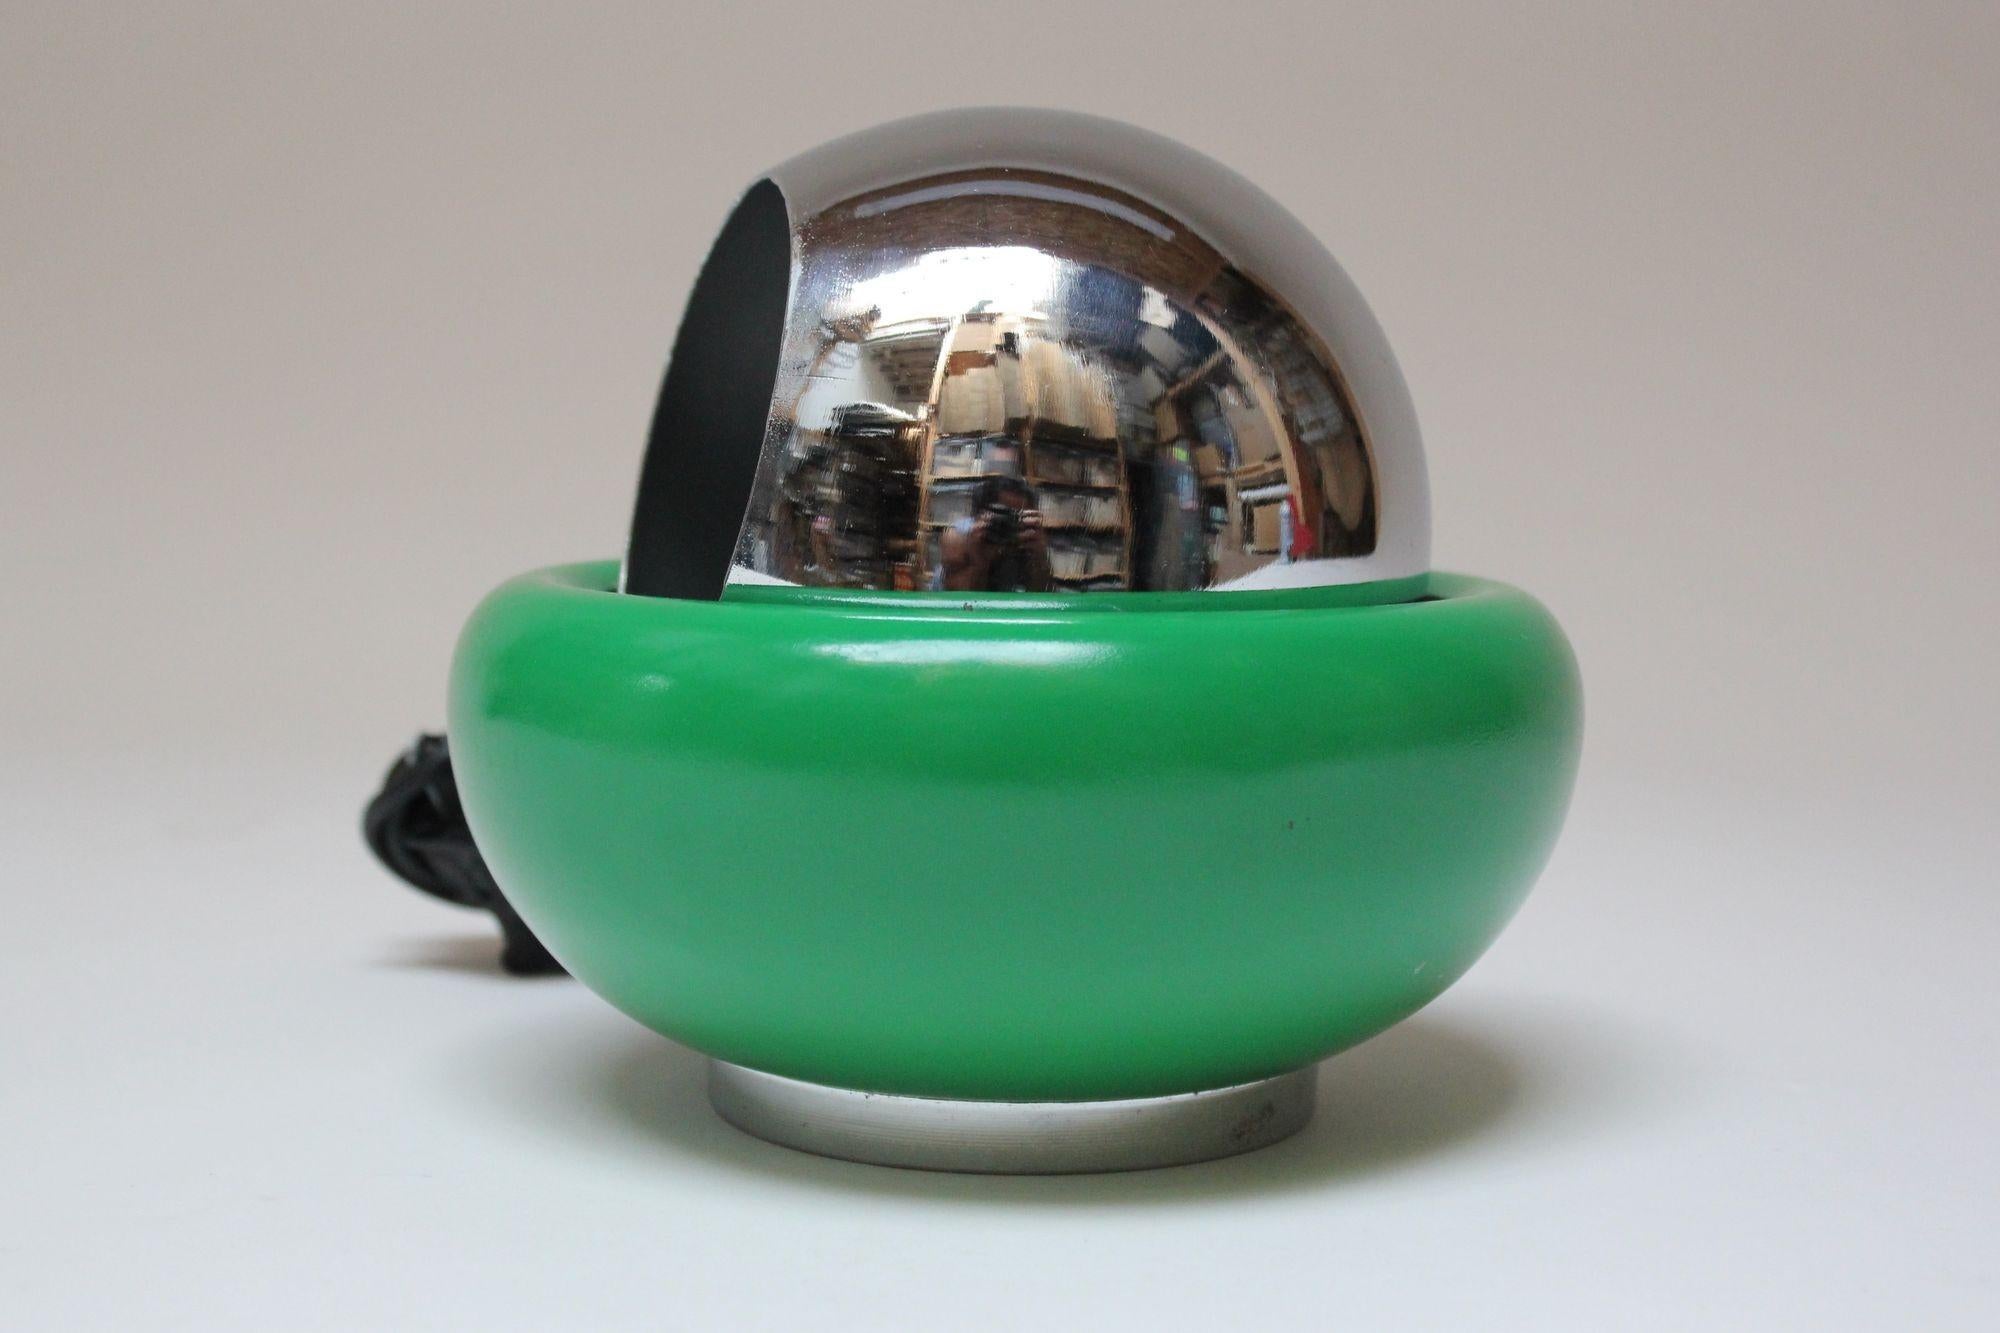 Table lamp designed by Goffredo Reggiani (ca. 1970s, Italy).
Composed of a chrome 'eye-ball' fixture housed within a magnetic green ceramic and chrome 'bowl' base. The magnetic function allows the fixture to maintain its stability after the position